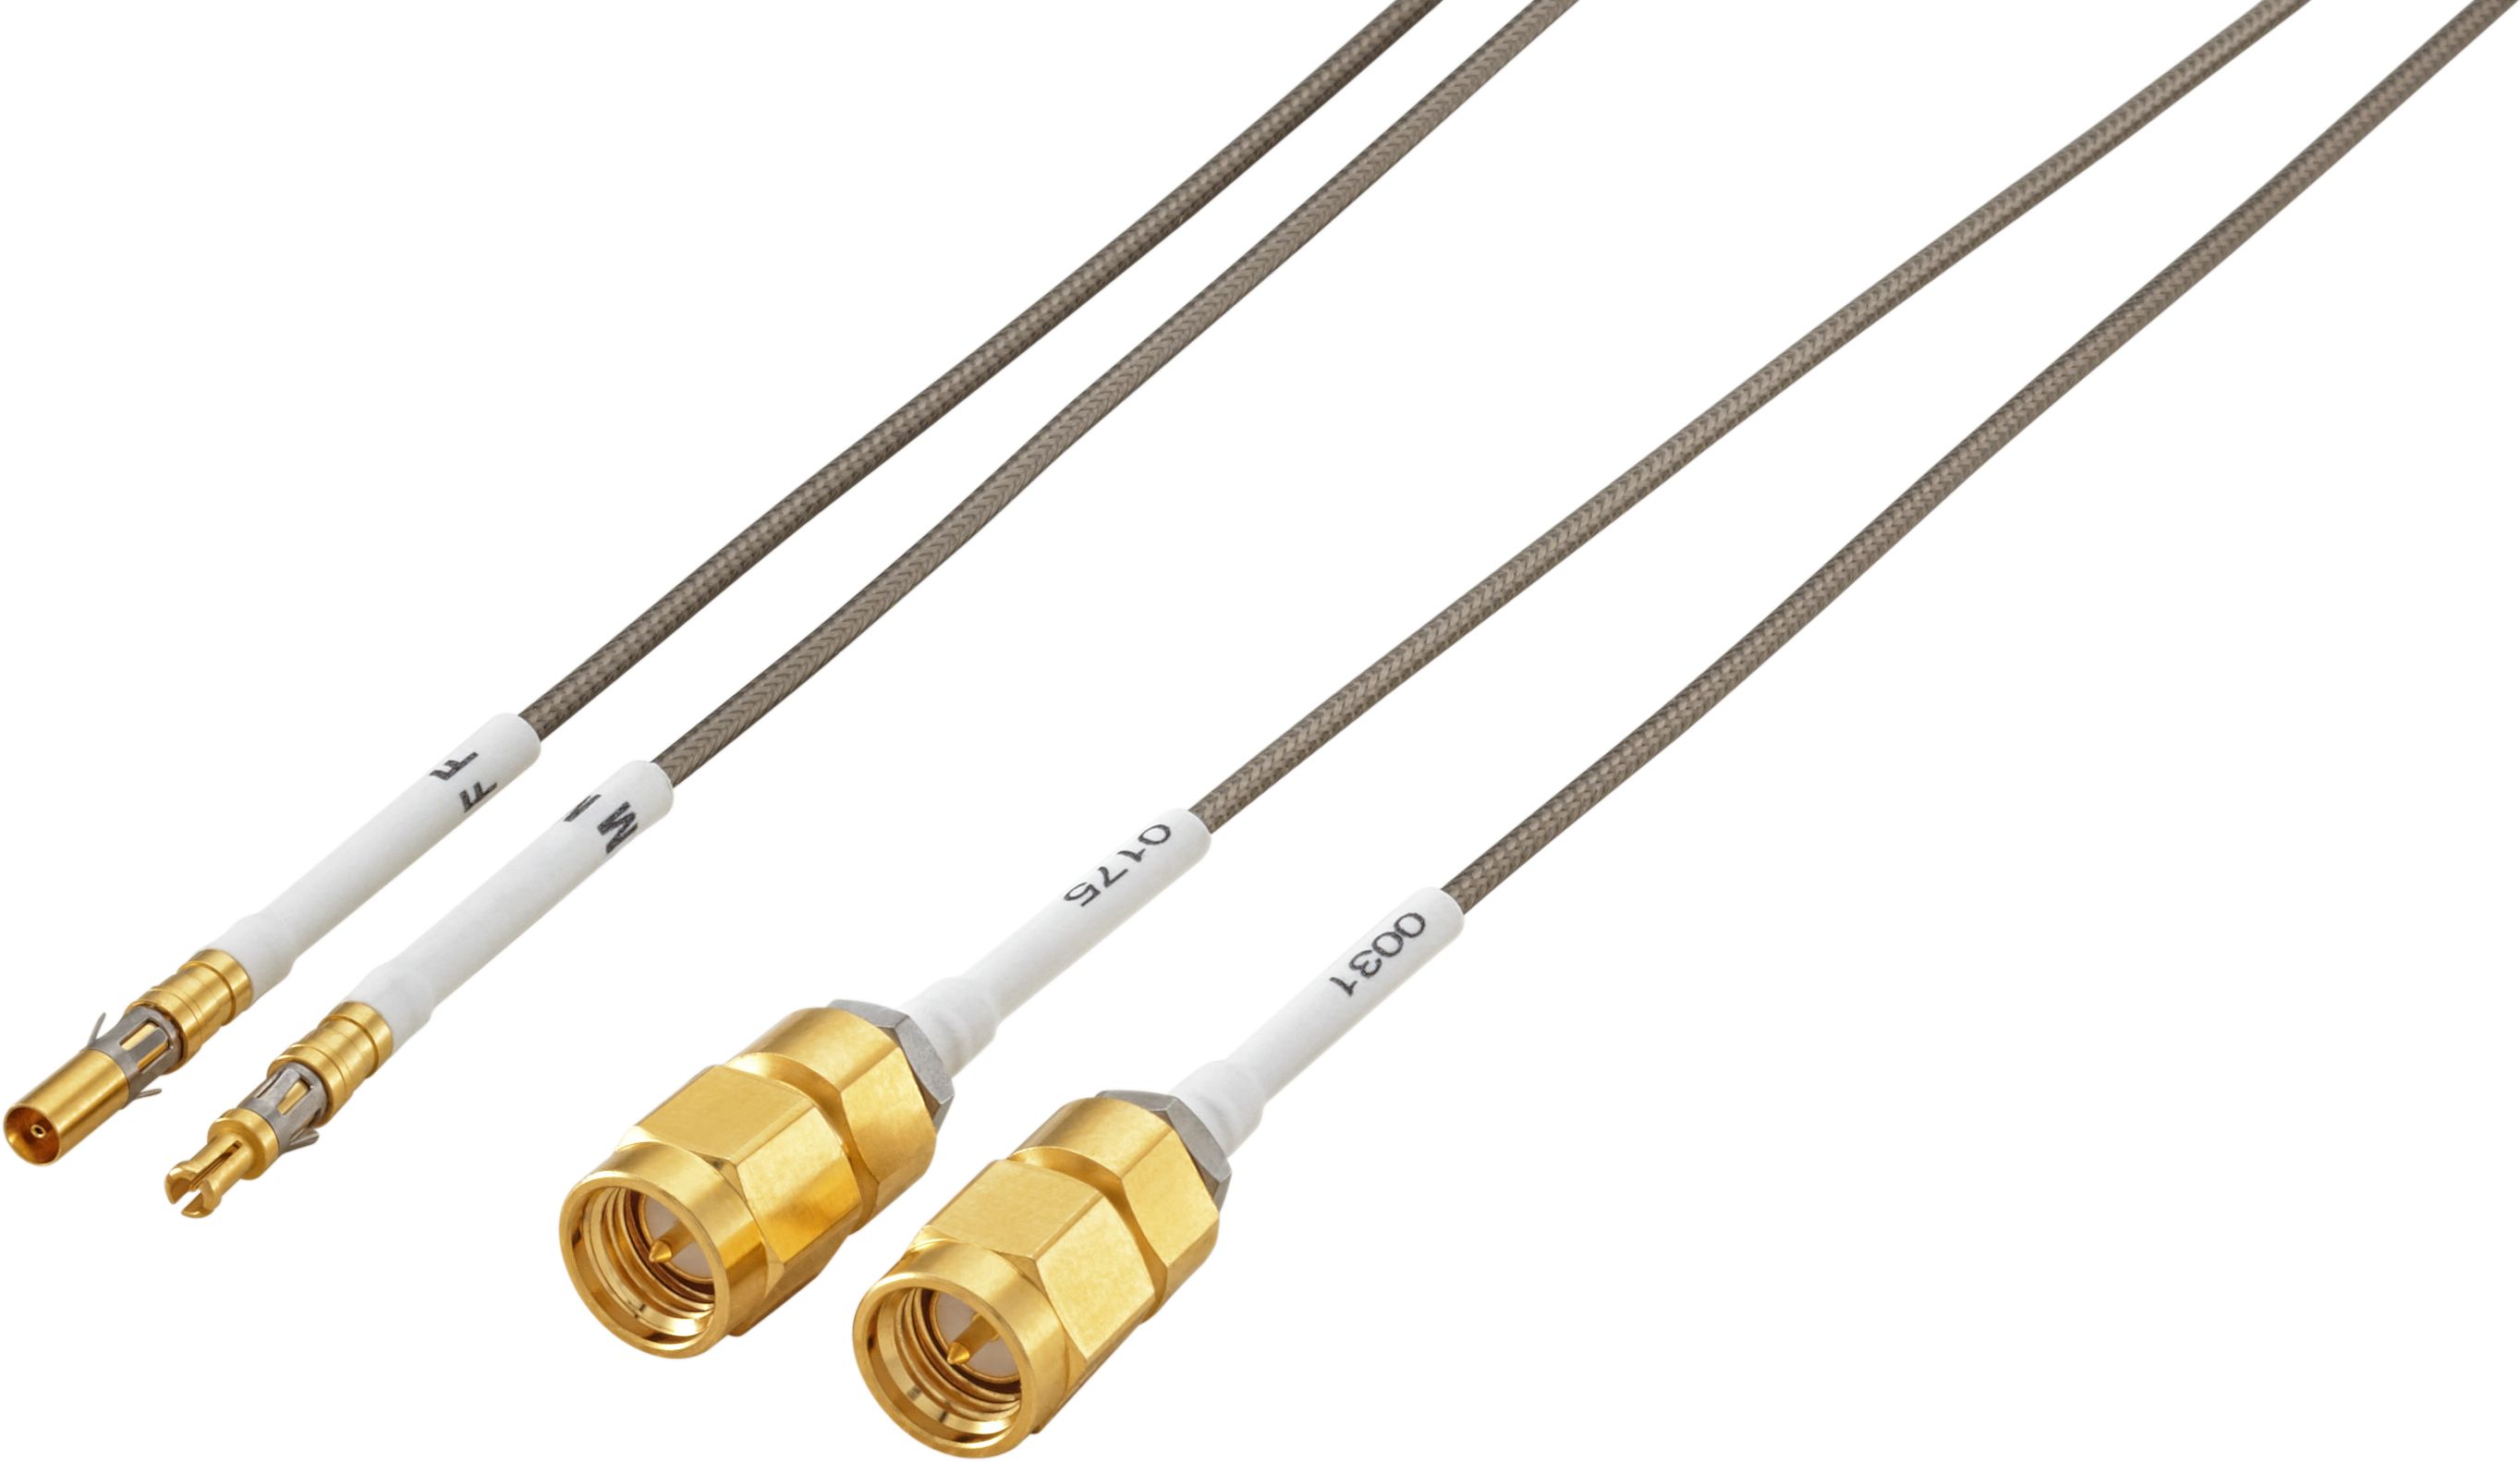 L99-A0481-300-non cable set | Cable Assemblies | Radio Frequency 